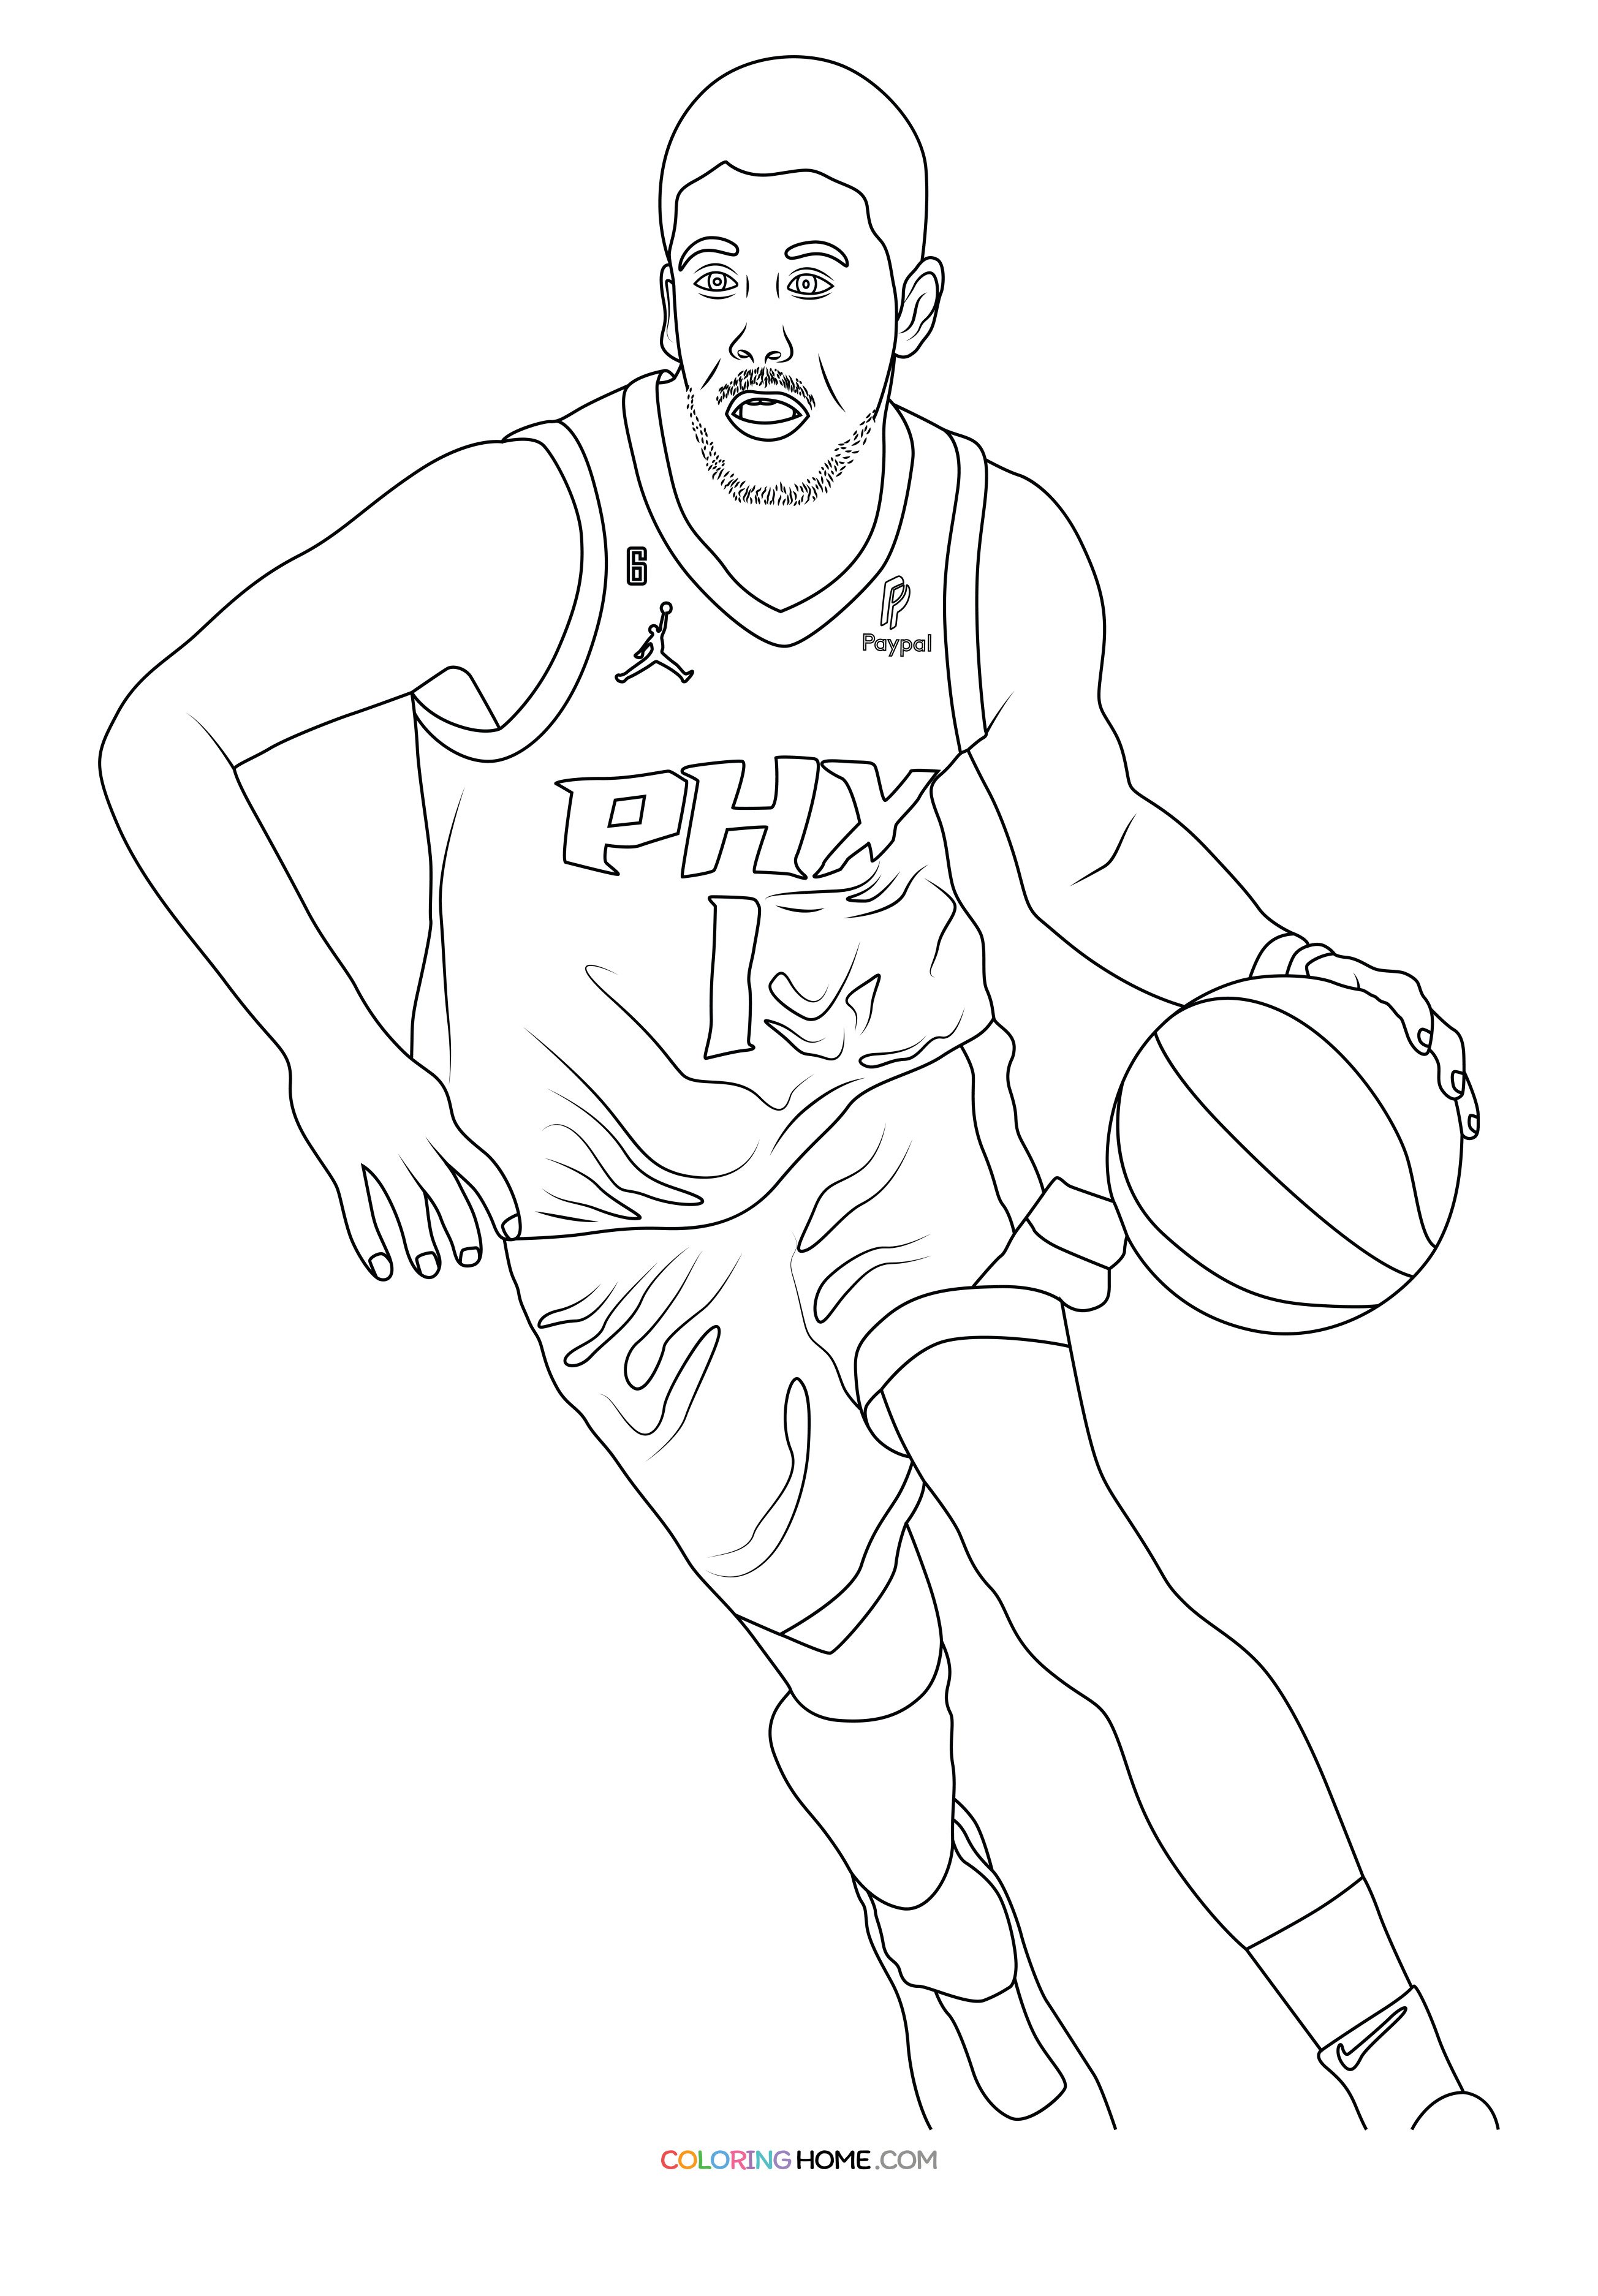 Devin Booker Coloring Page Coloring Pages